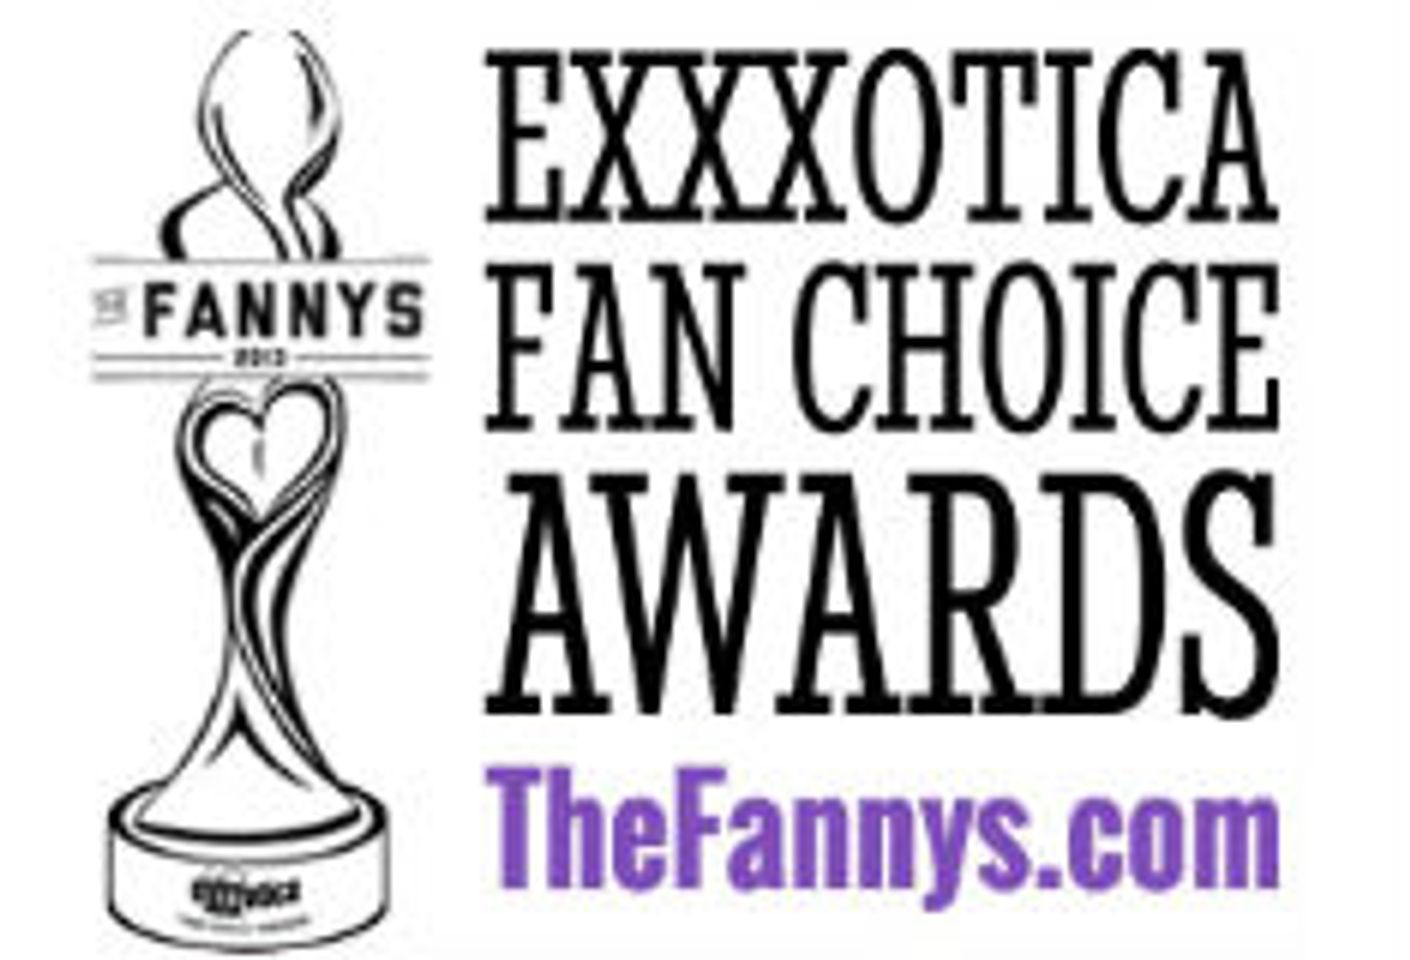 Star, Stone, and Others Nominated for 2014 Fanny Awards